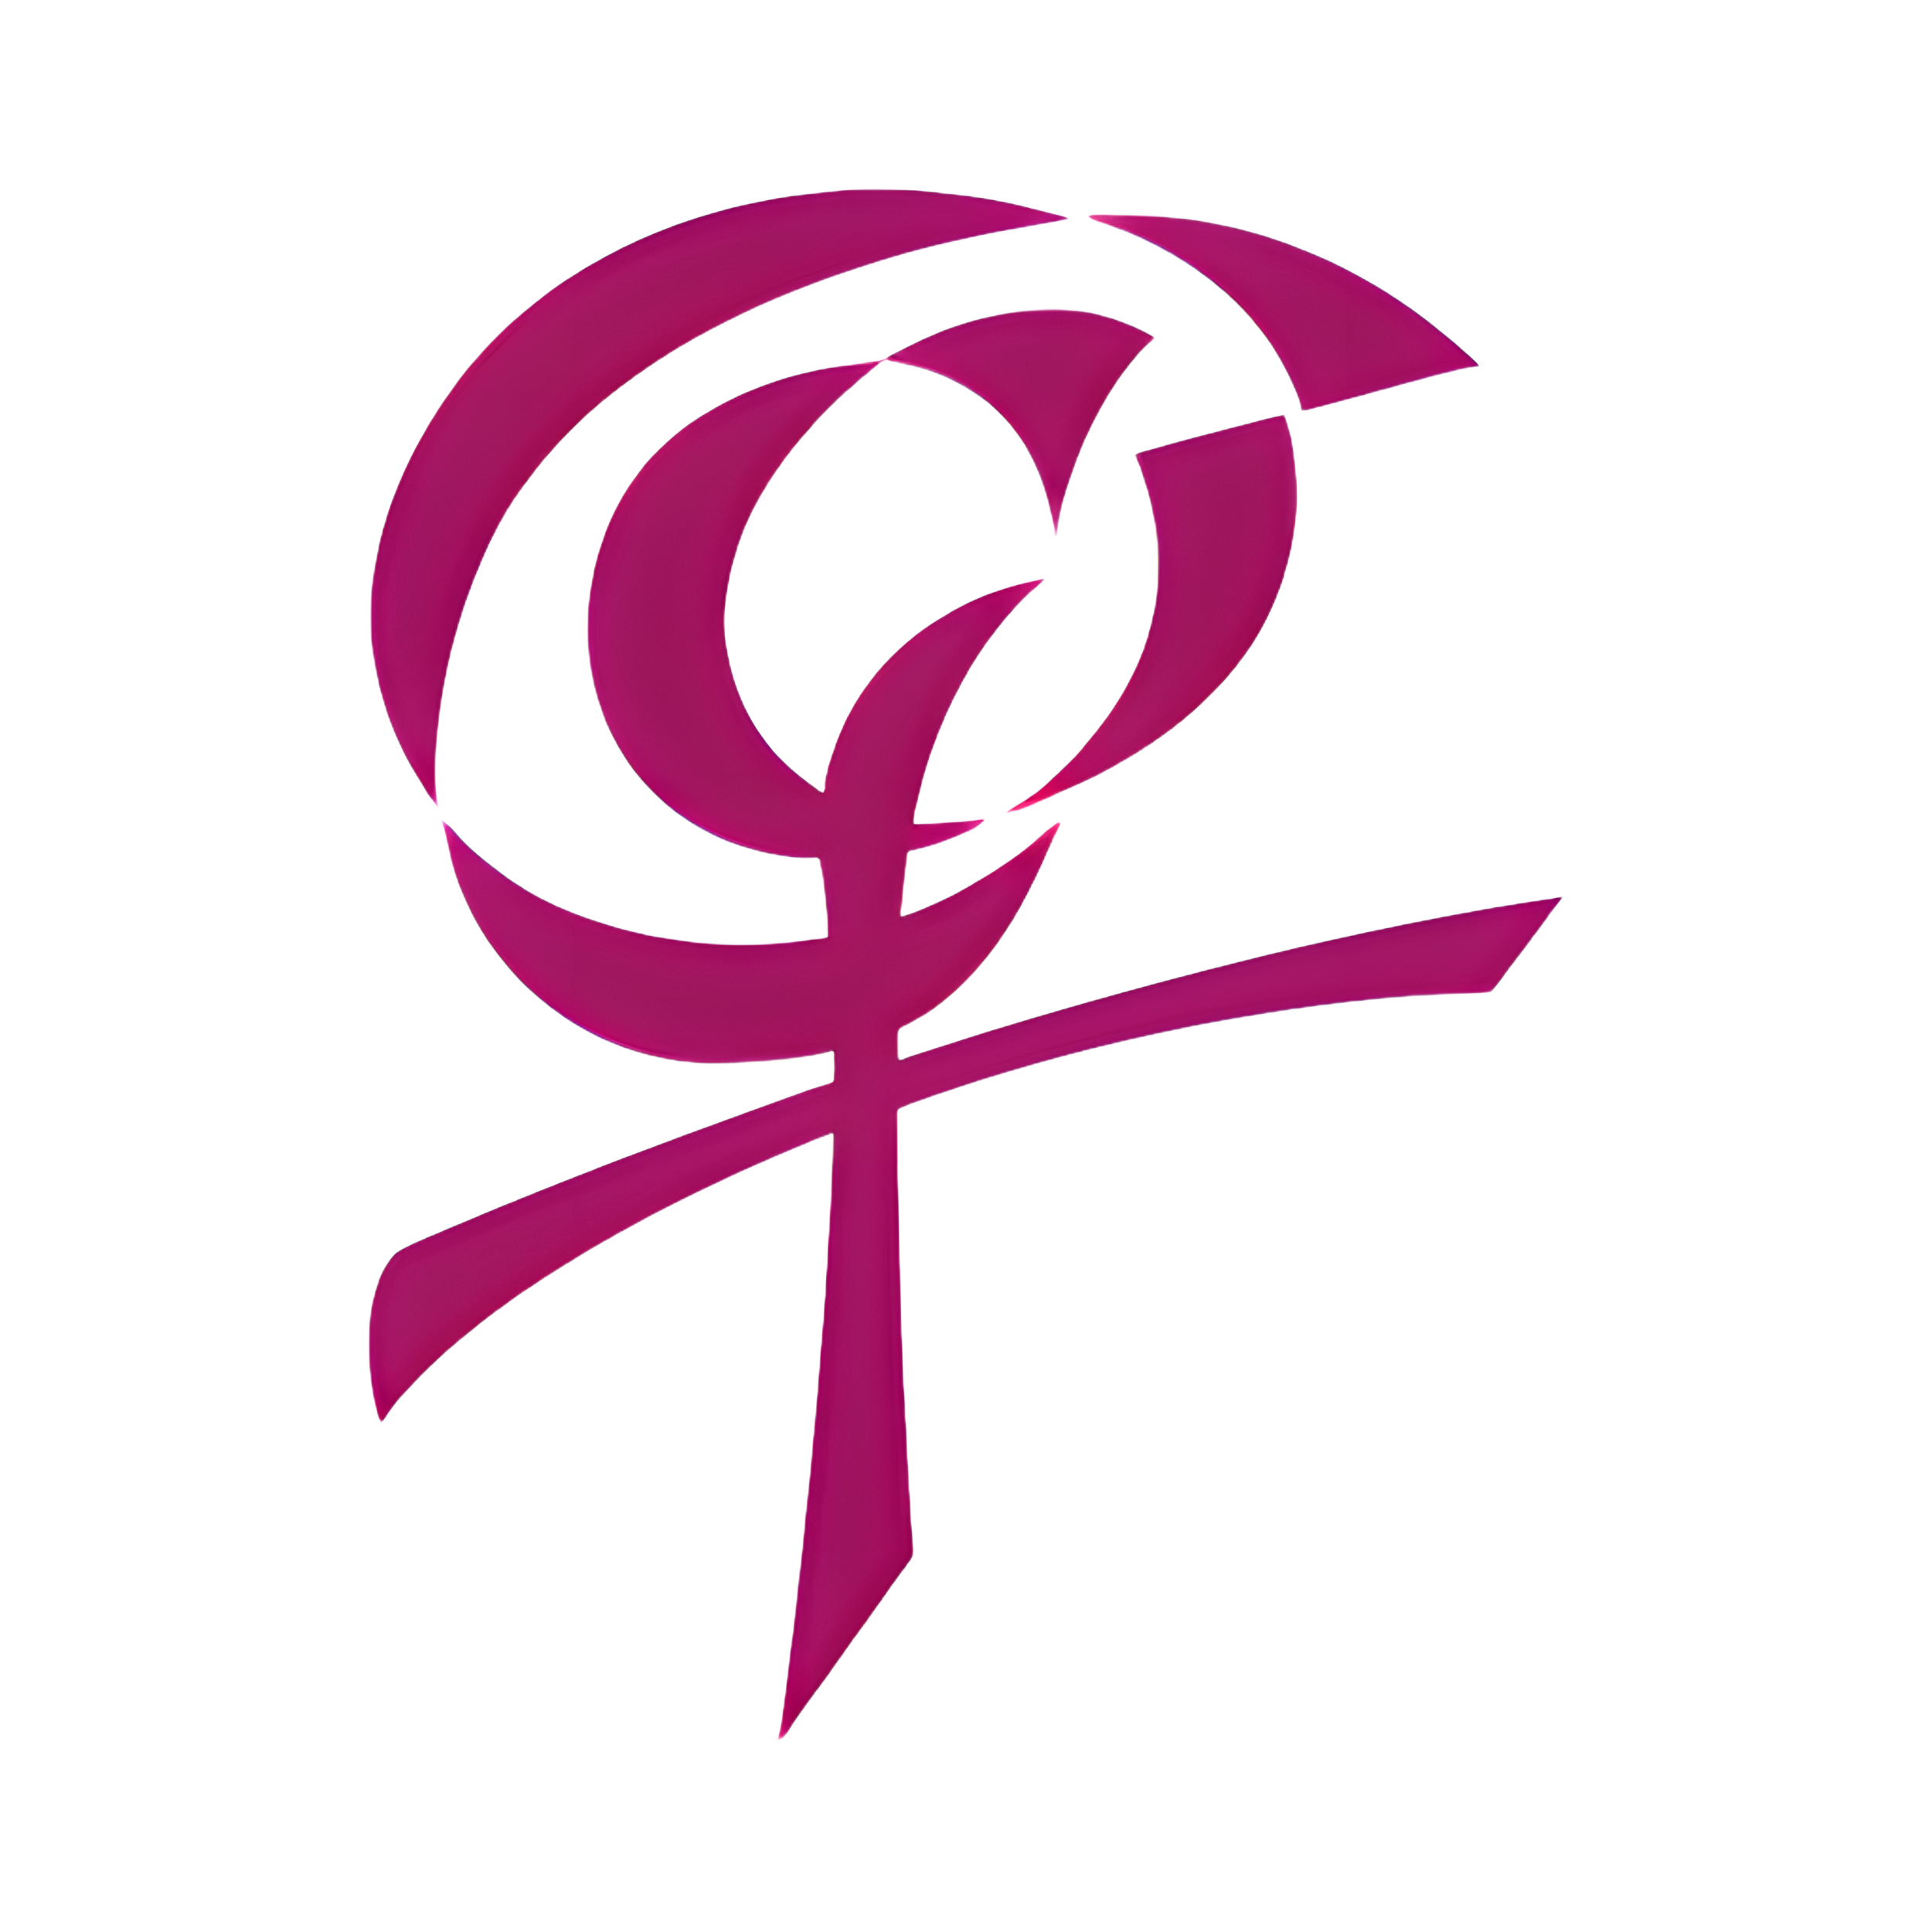 Transparent Sisters of Good Counsel logo